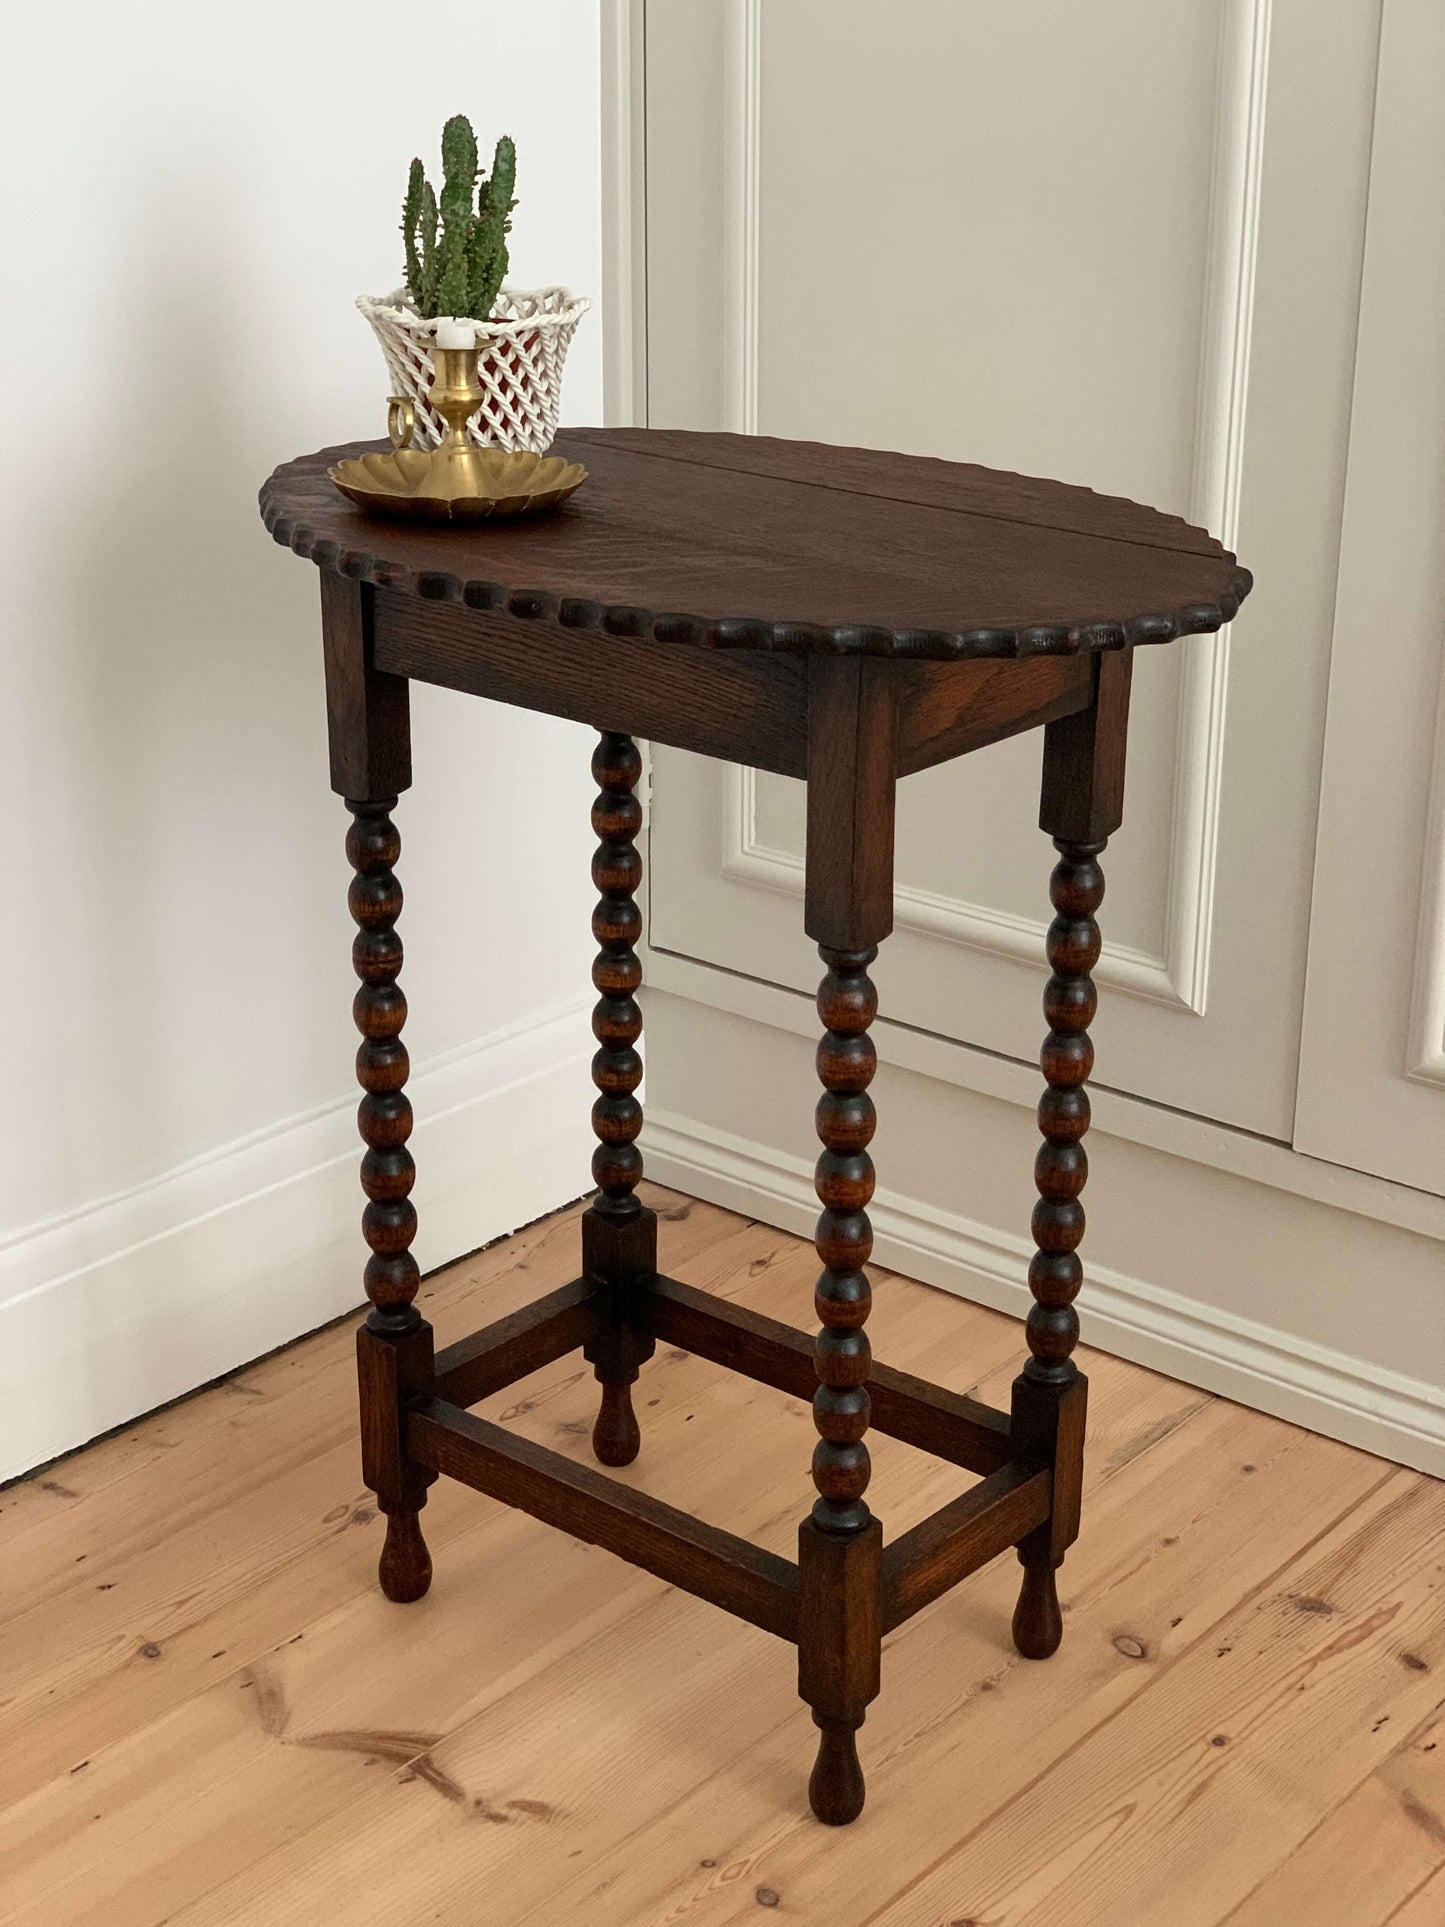 Antique oak table with scalloped edges and bobbin legs